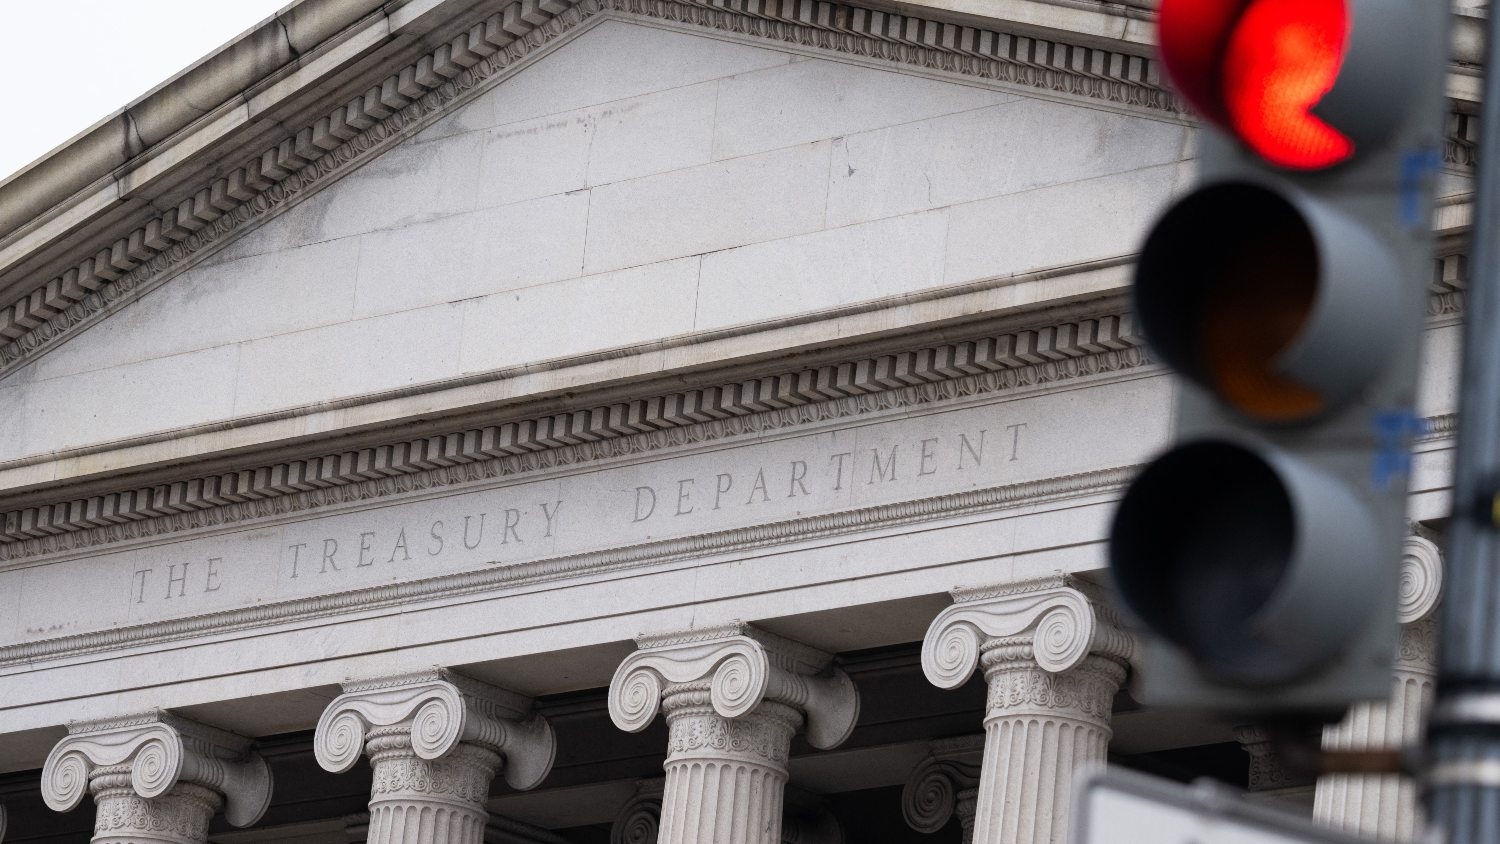 The US Department of Treasury building in Washington DC on 19 January 2023.